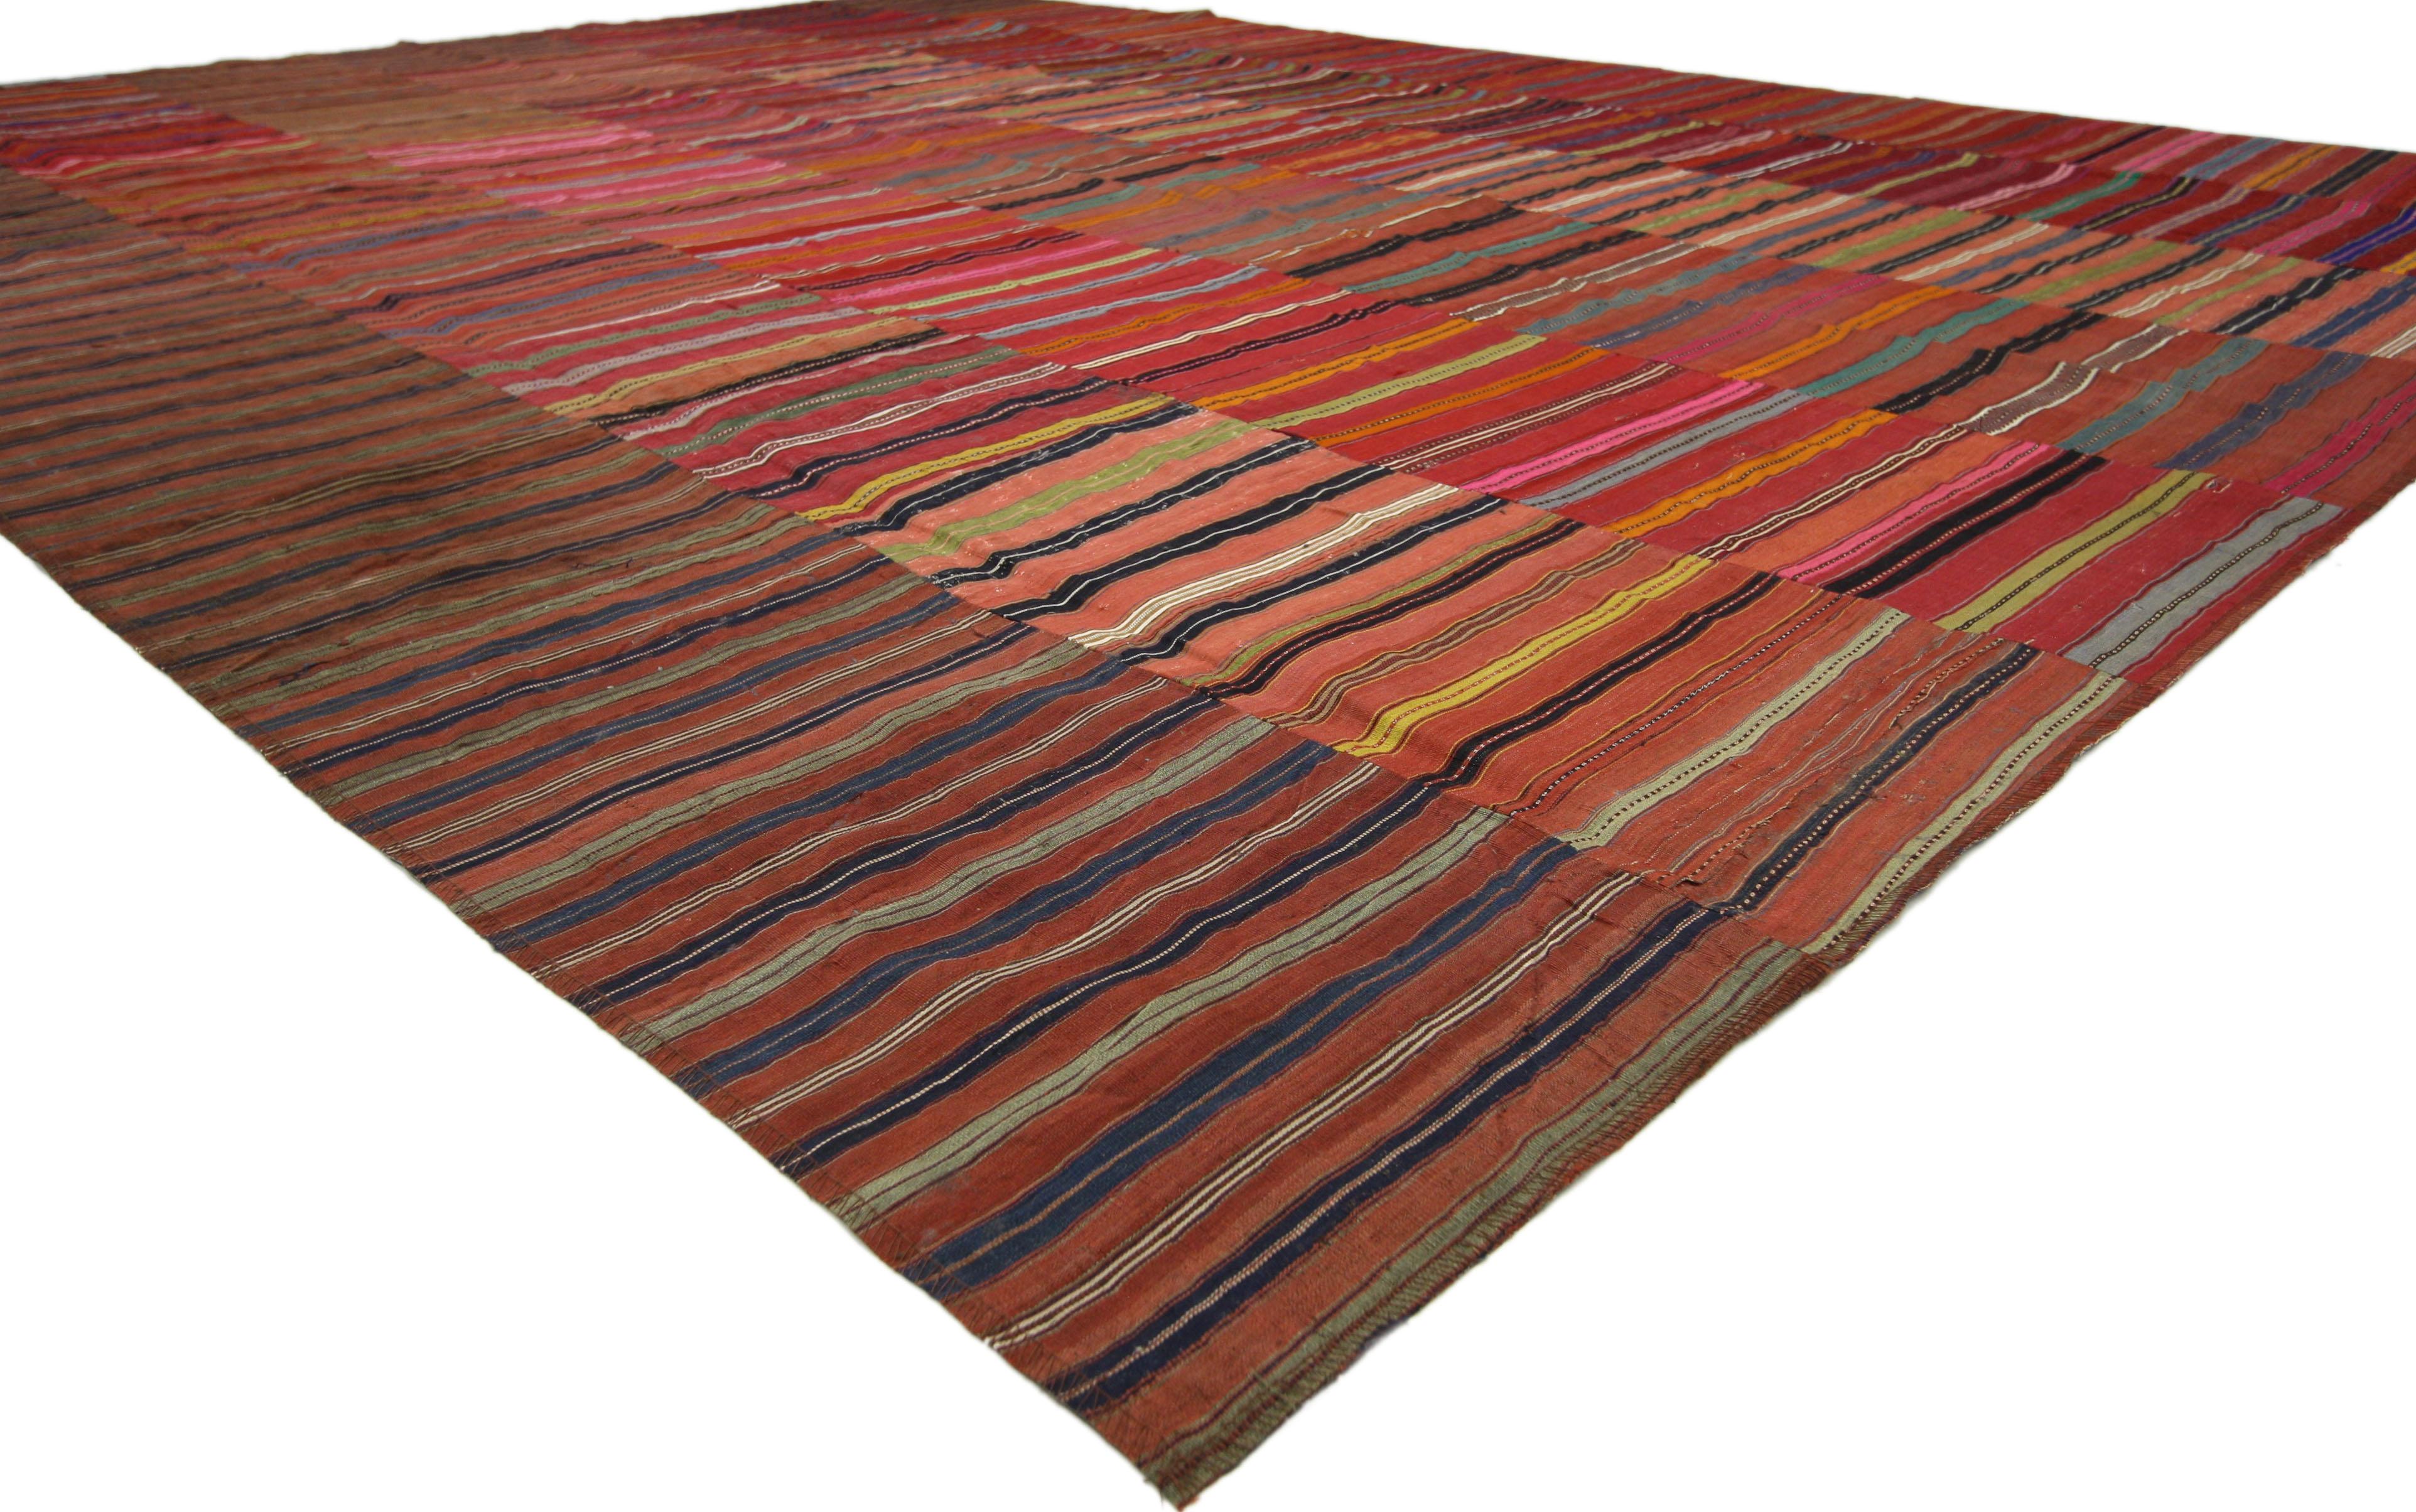 60646 Distressed Vintage Turkish Striped Kilim Rug with Modern Rustic Cabin Style 08'09 x 11'08. With its rustic sensibility and rugged beauty, this hand-woven wool vintage Turkish striped kilim rug manages to meld contemporary, modern, and